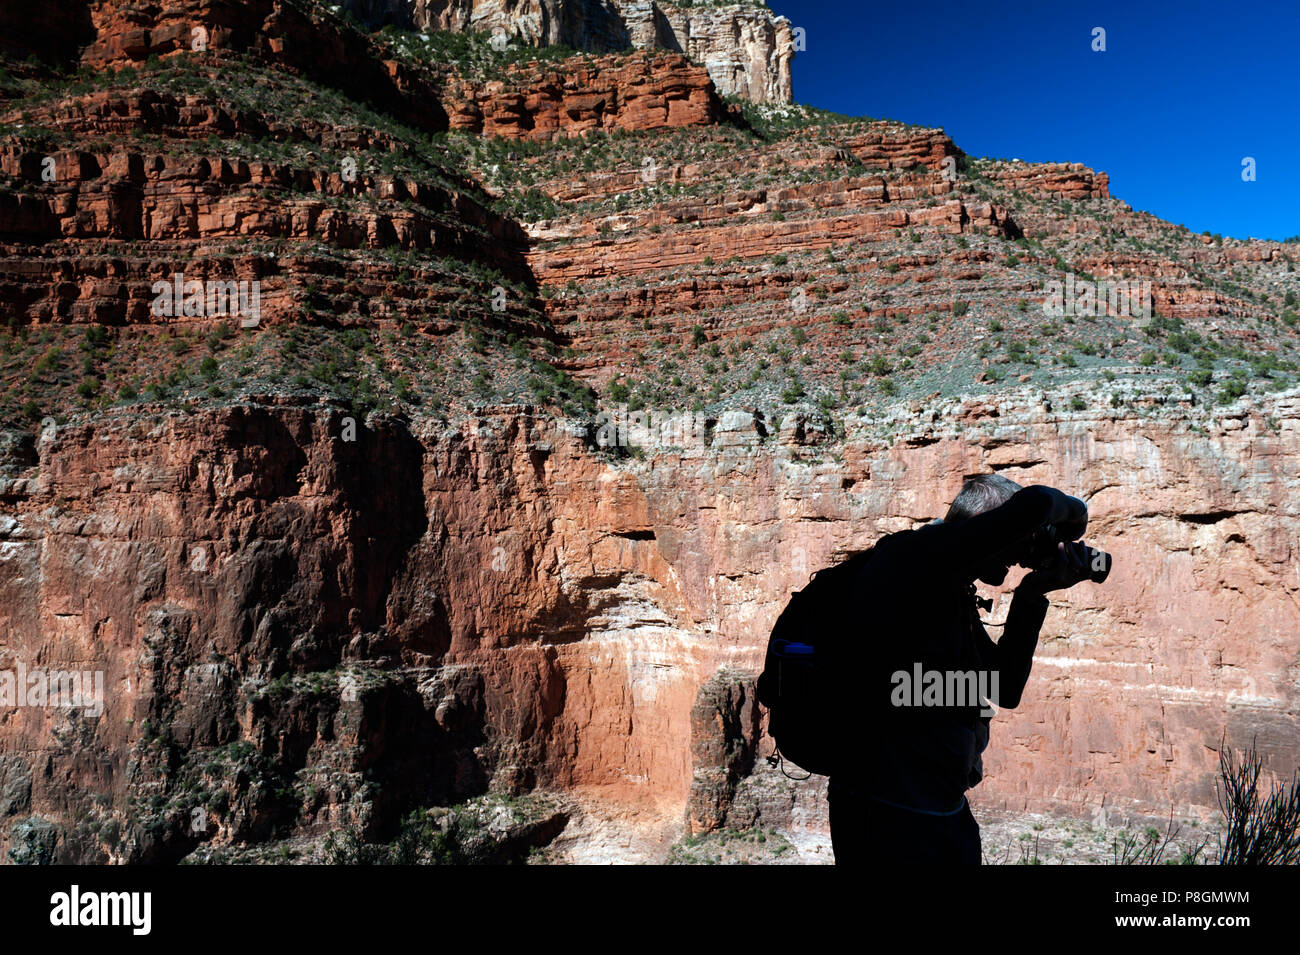 Silhouetted against a sunlit cliff, a hiker takes a picture on Bright Angel Trail, Grand Canyon, Arizona, USA. Stock Photo